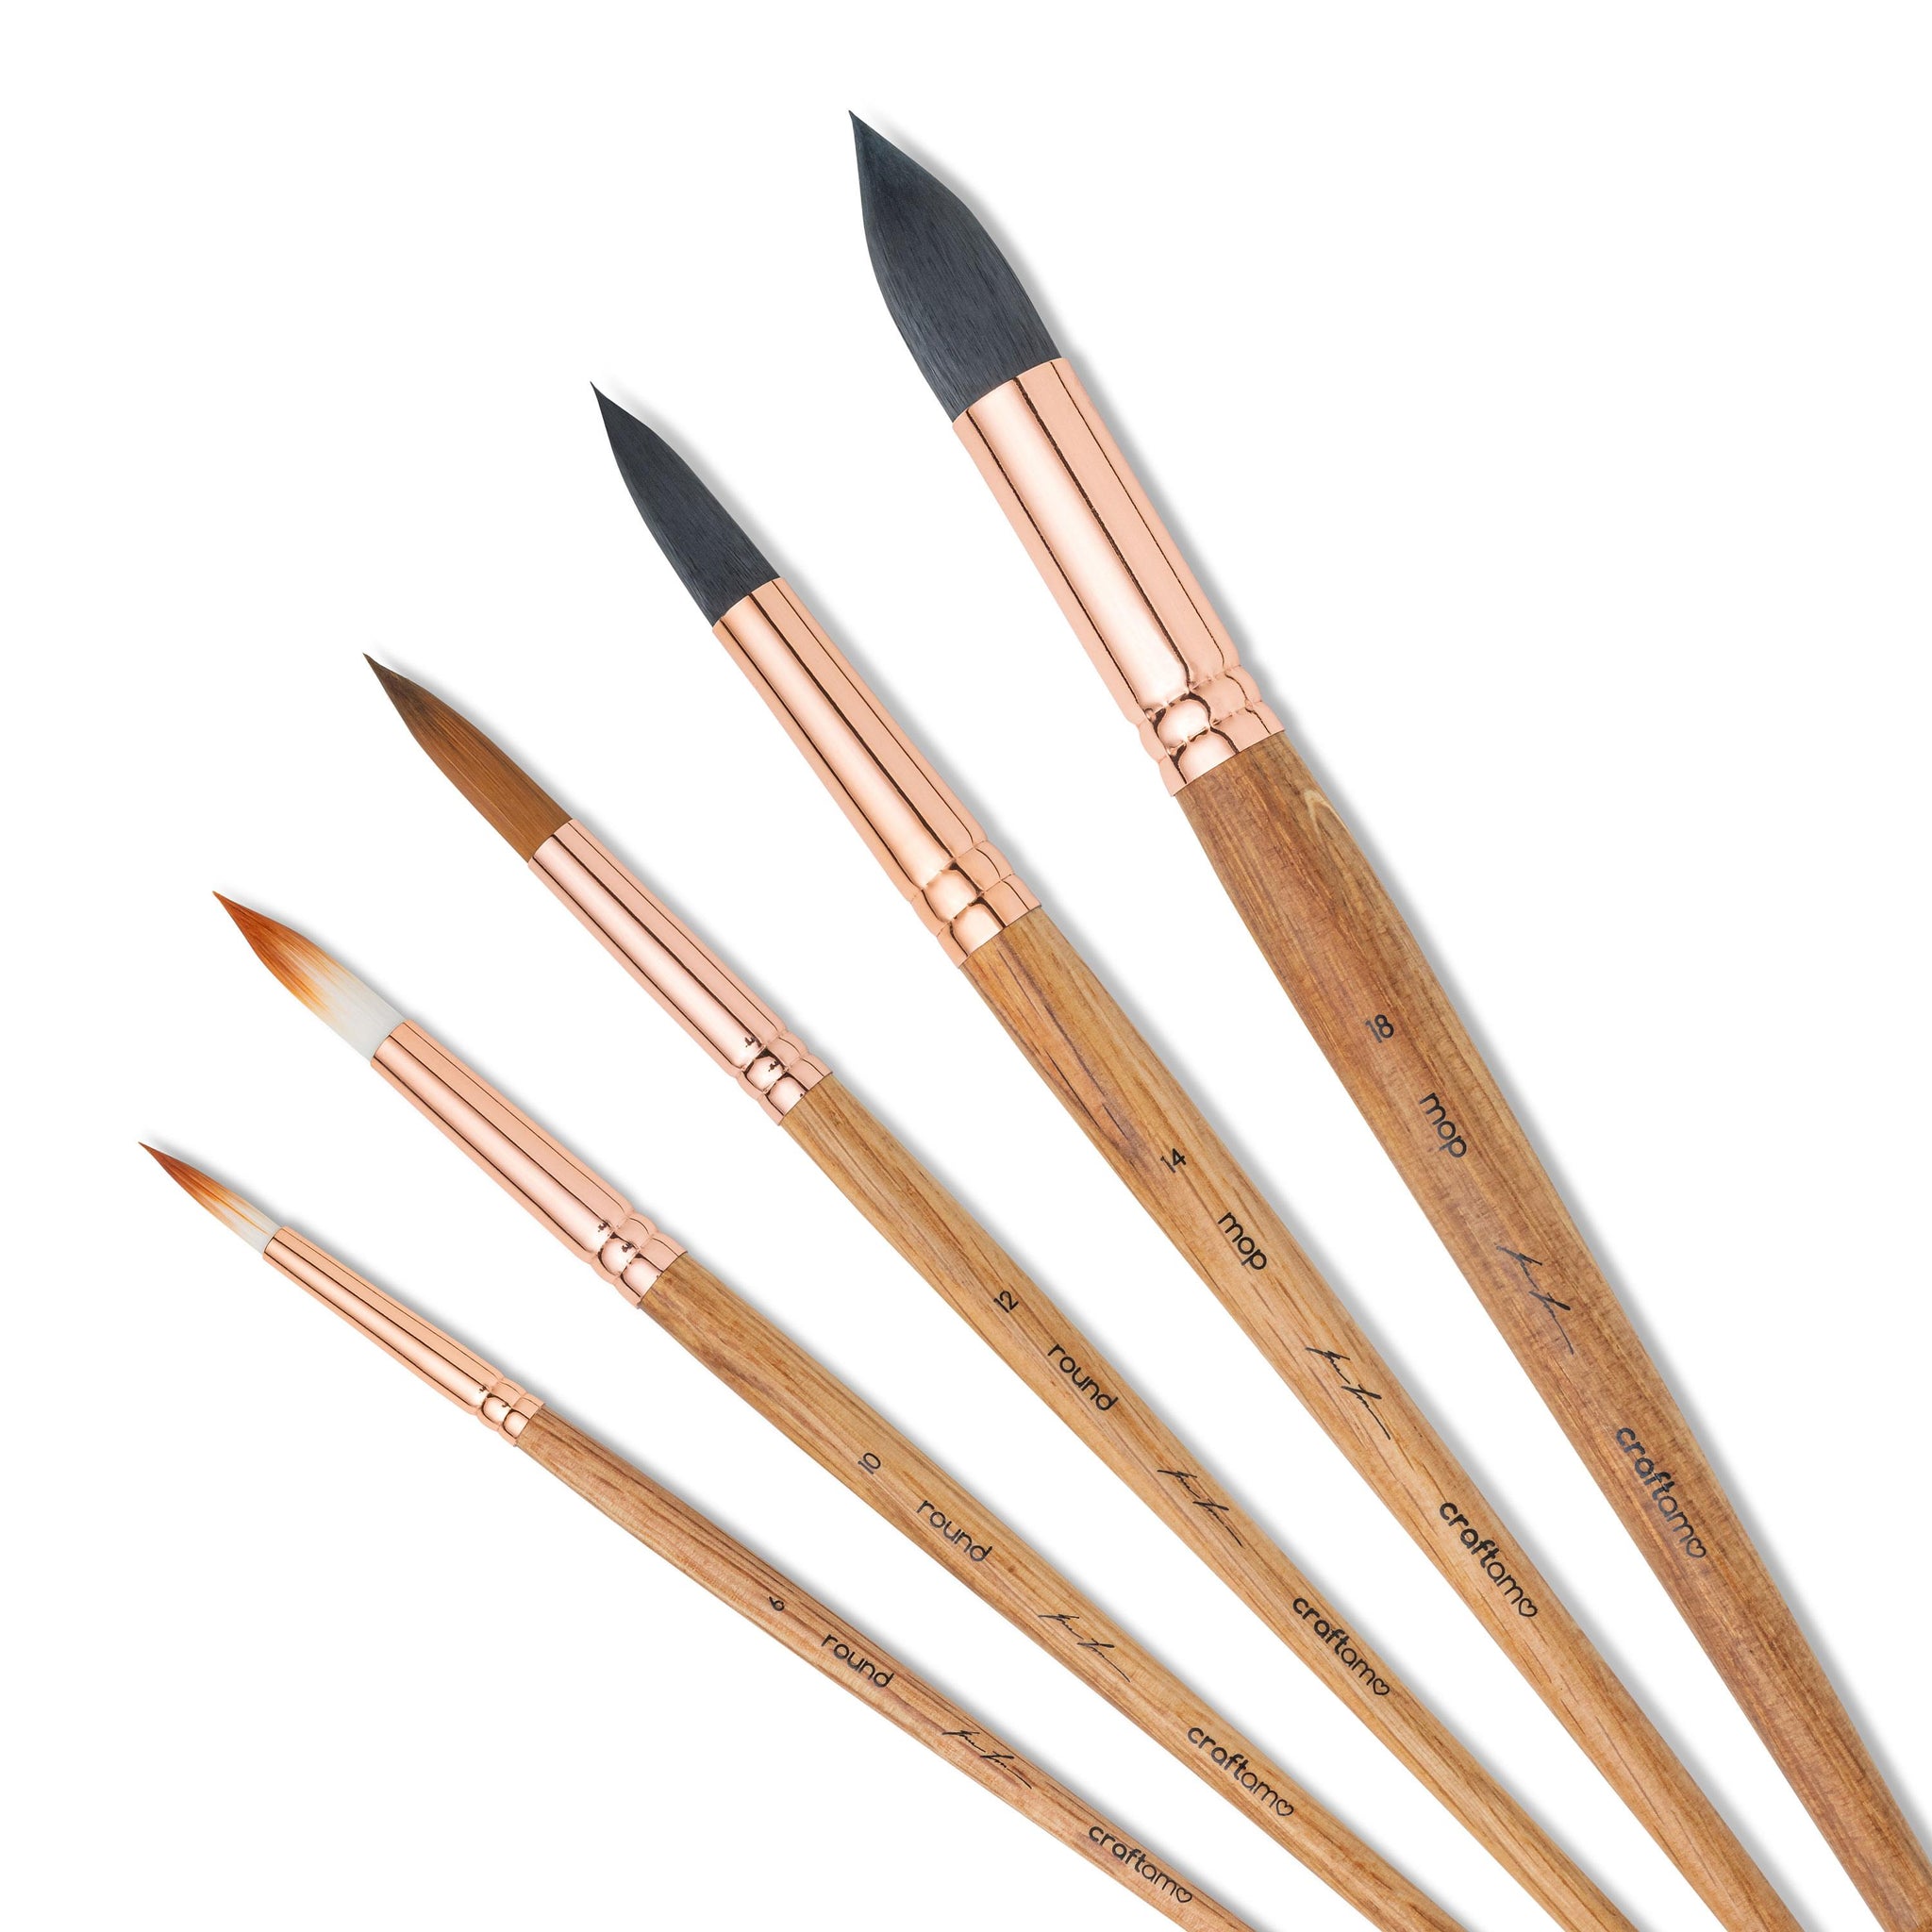 CRAFTAMO Brushes - Paint Brush Set for Watercolor, Acrylic, Oil